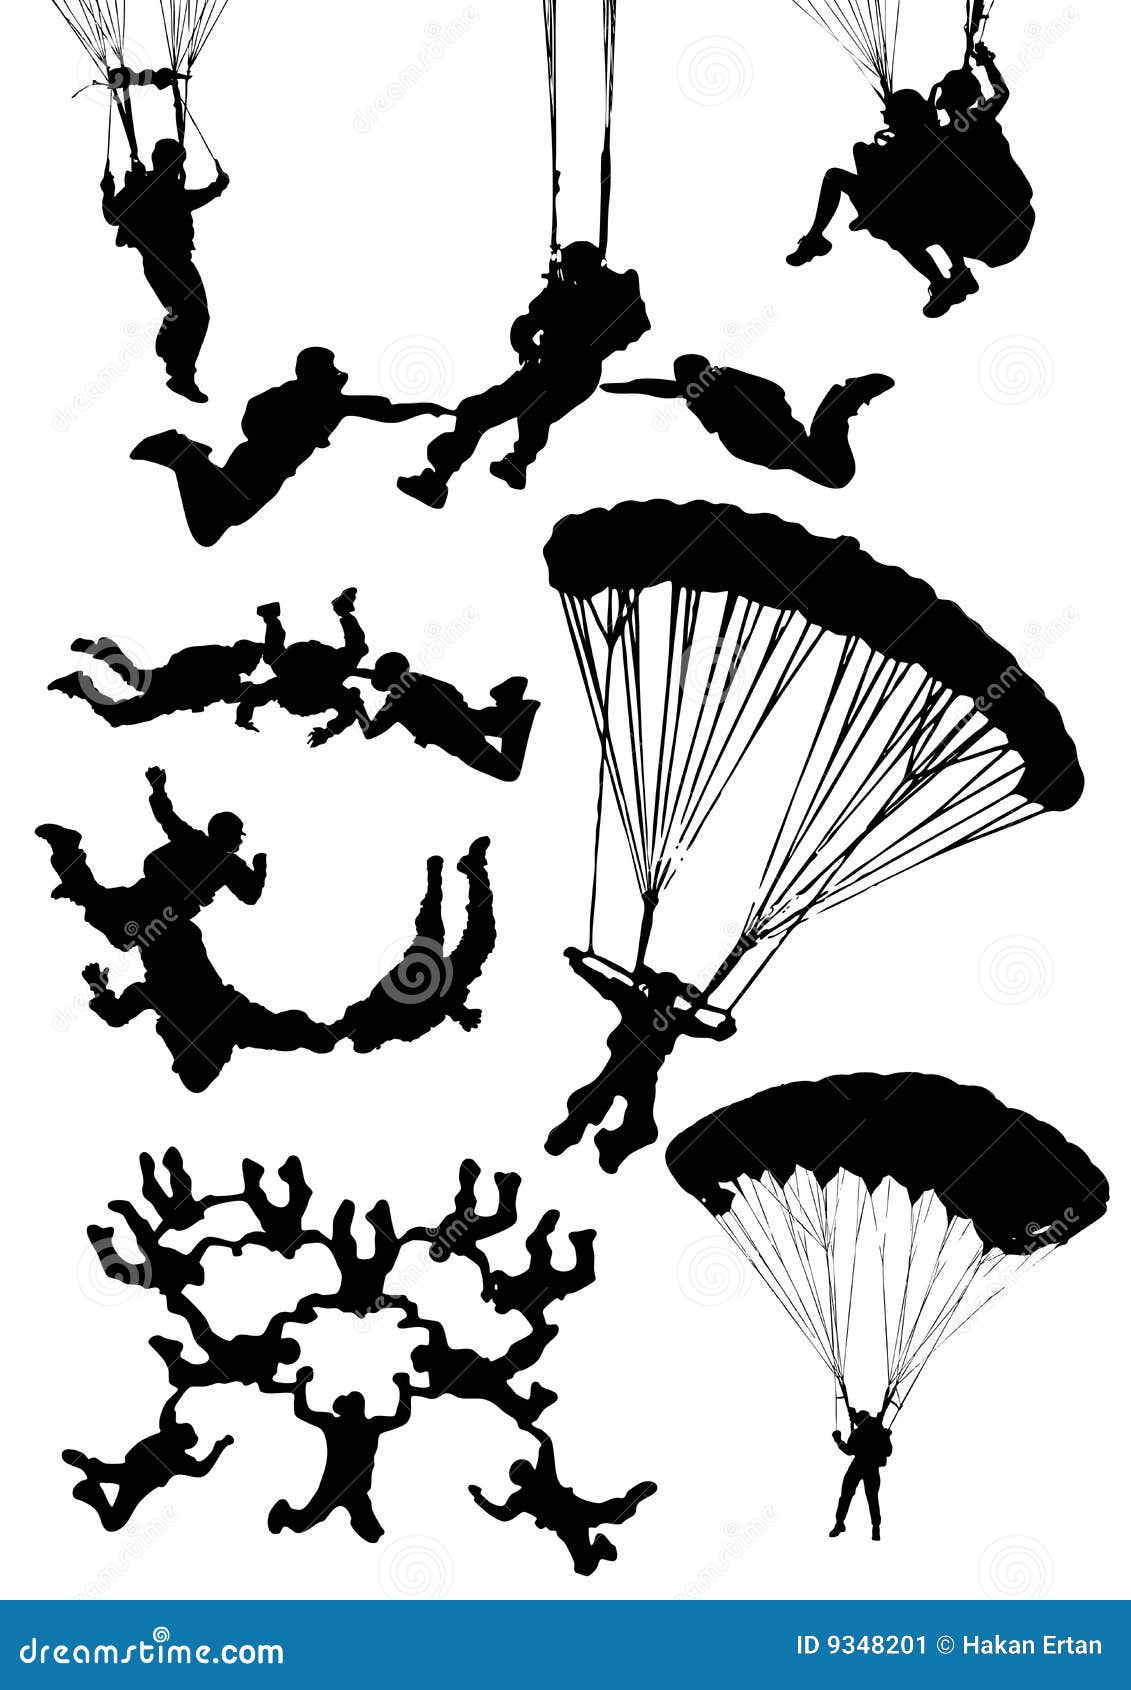 skydiving silhouettes